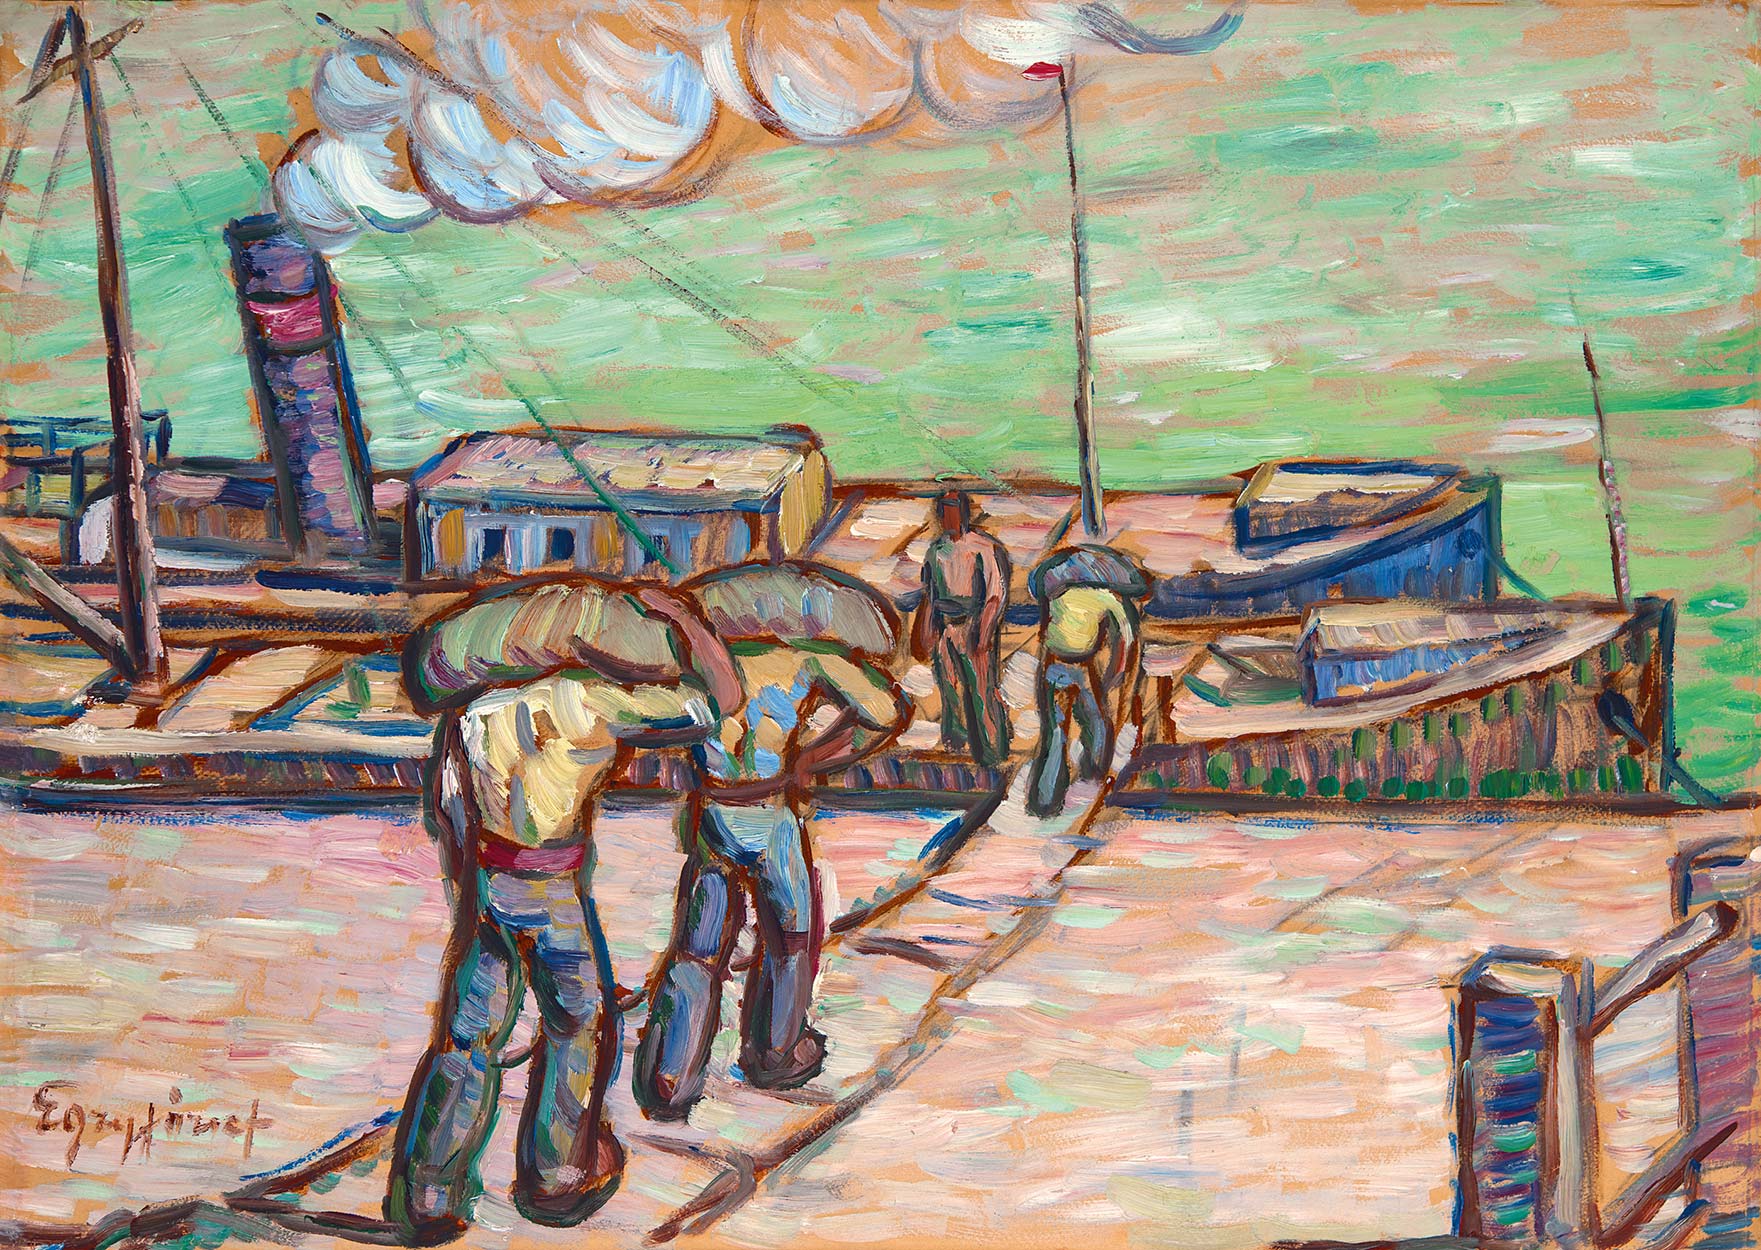 Egry József (1883-1951) Workers, 1911-1912